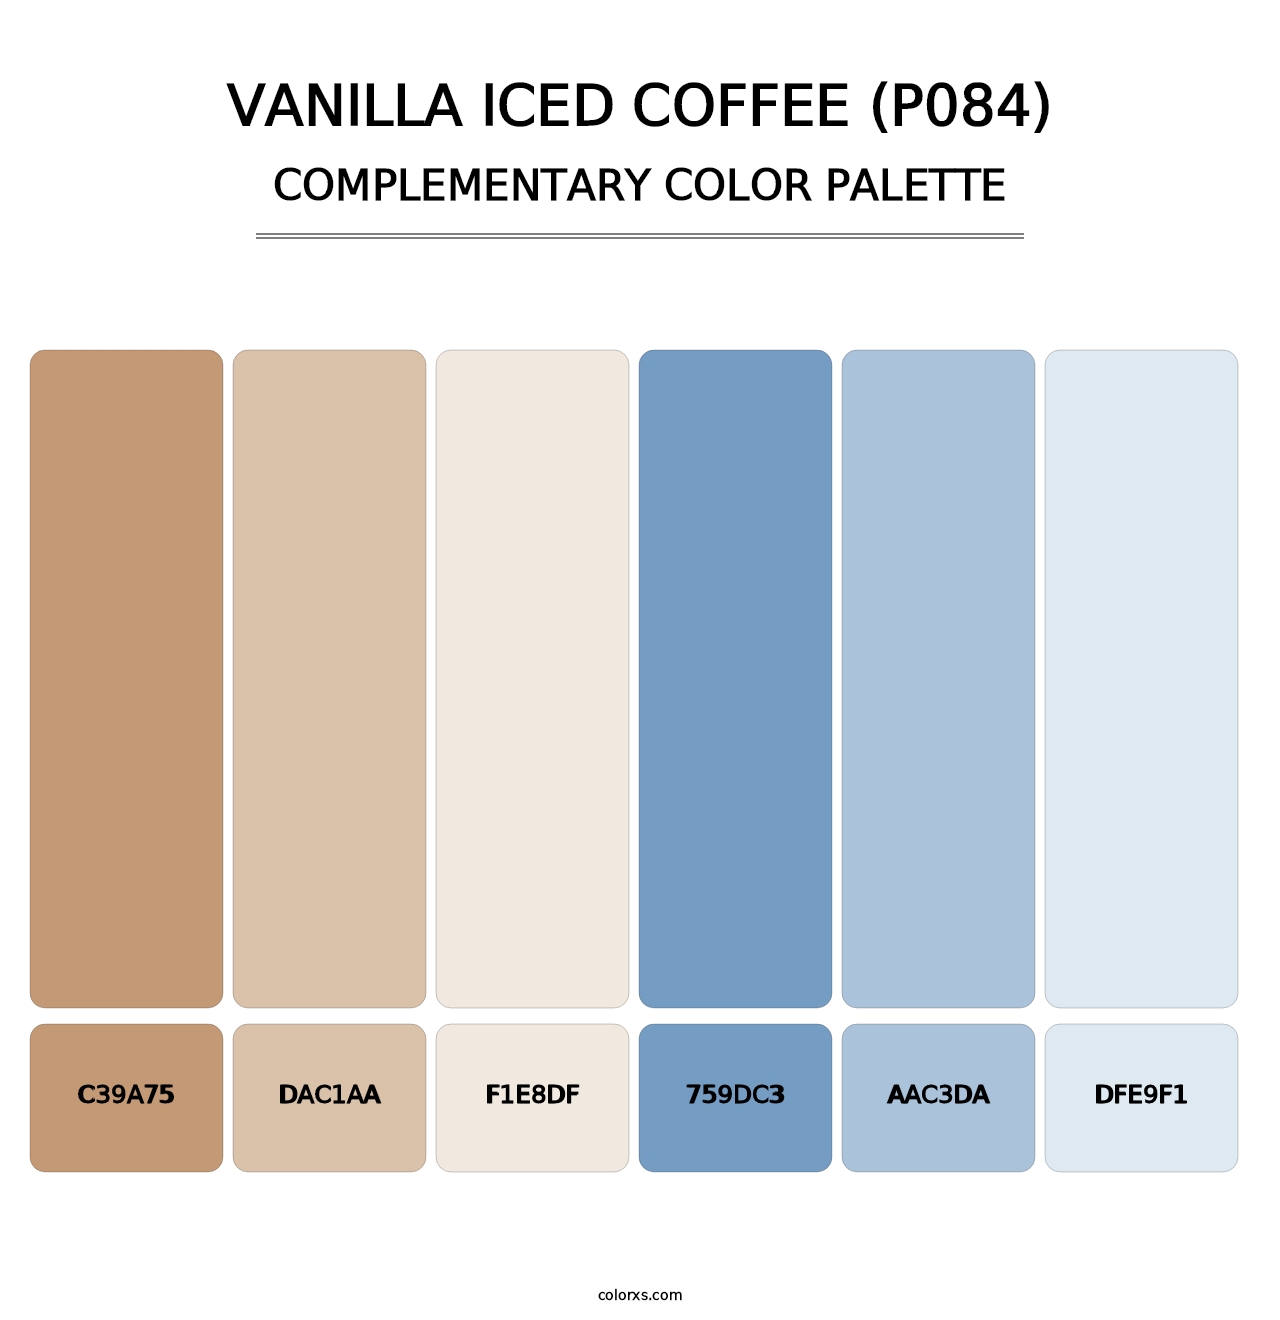 Vanilla Iced Coffee (P084) - Complementary Color Palette